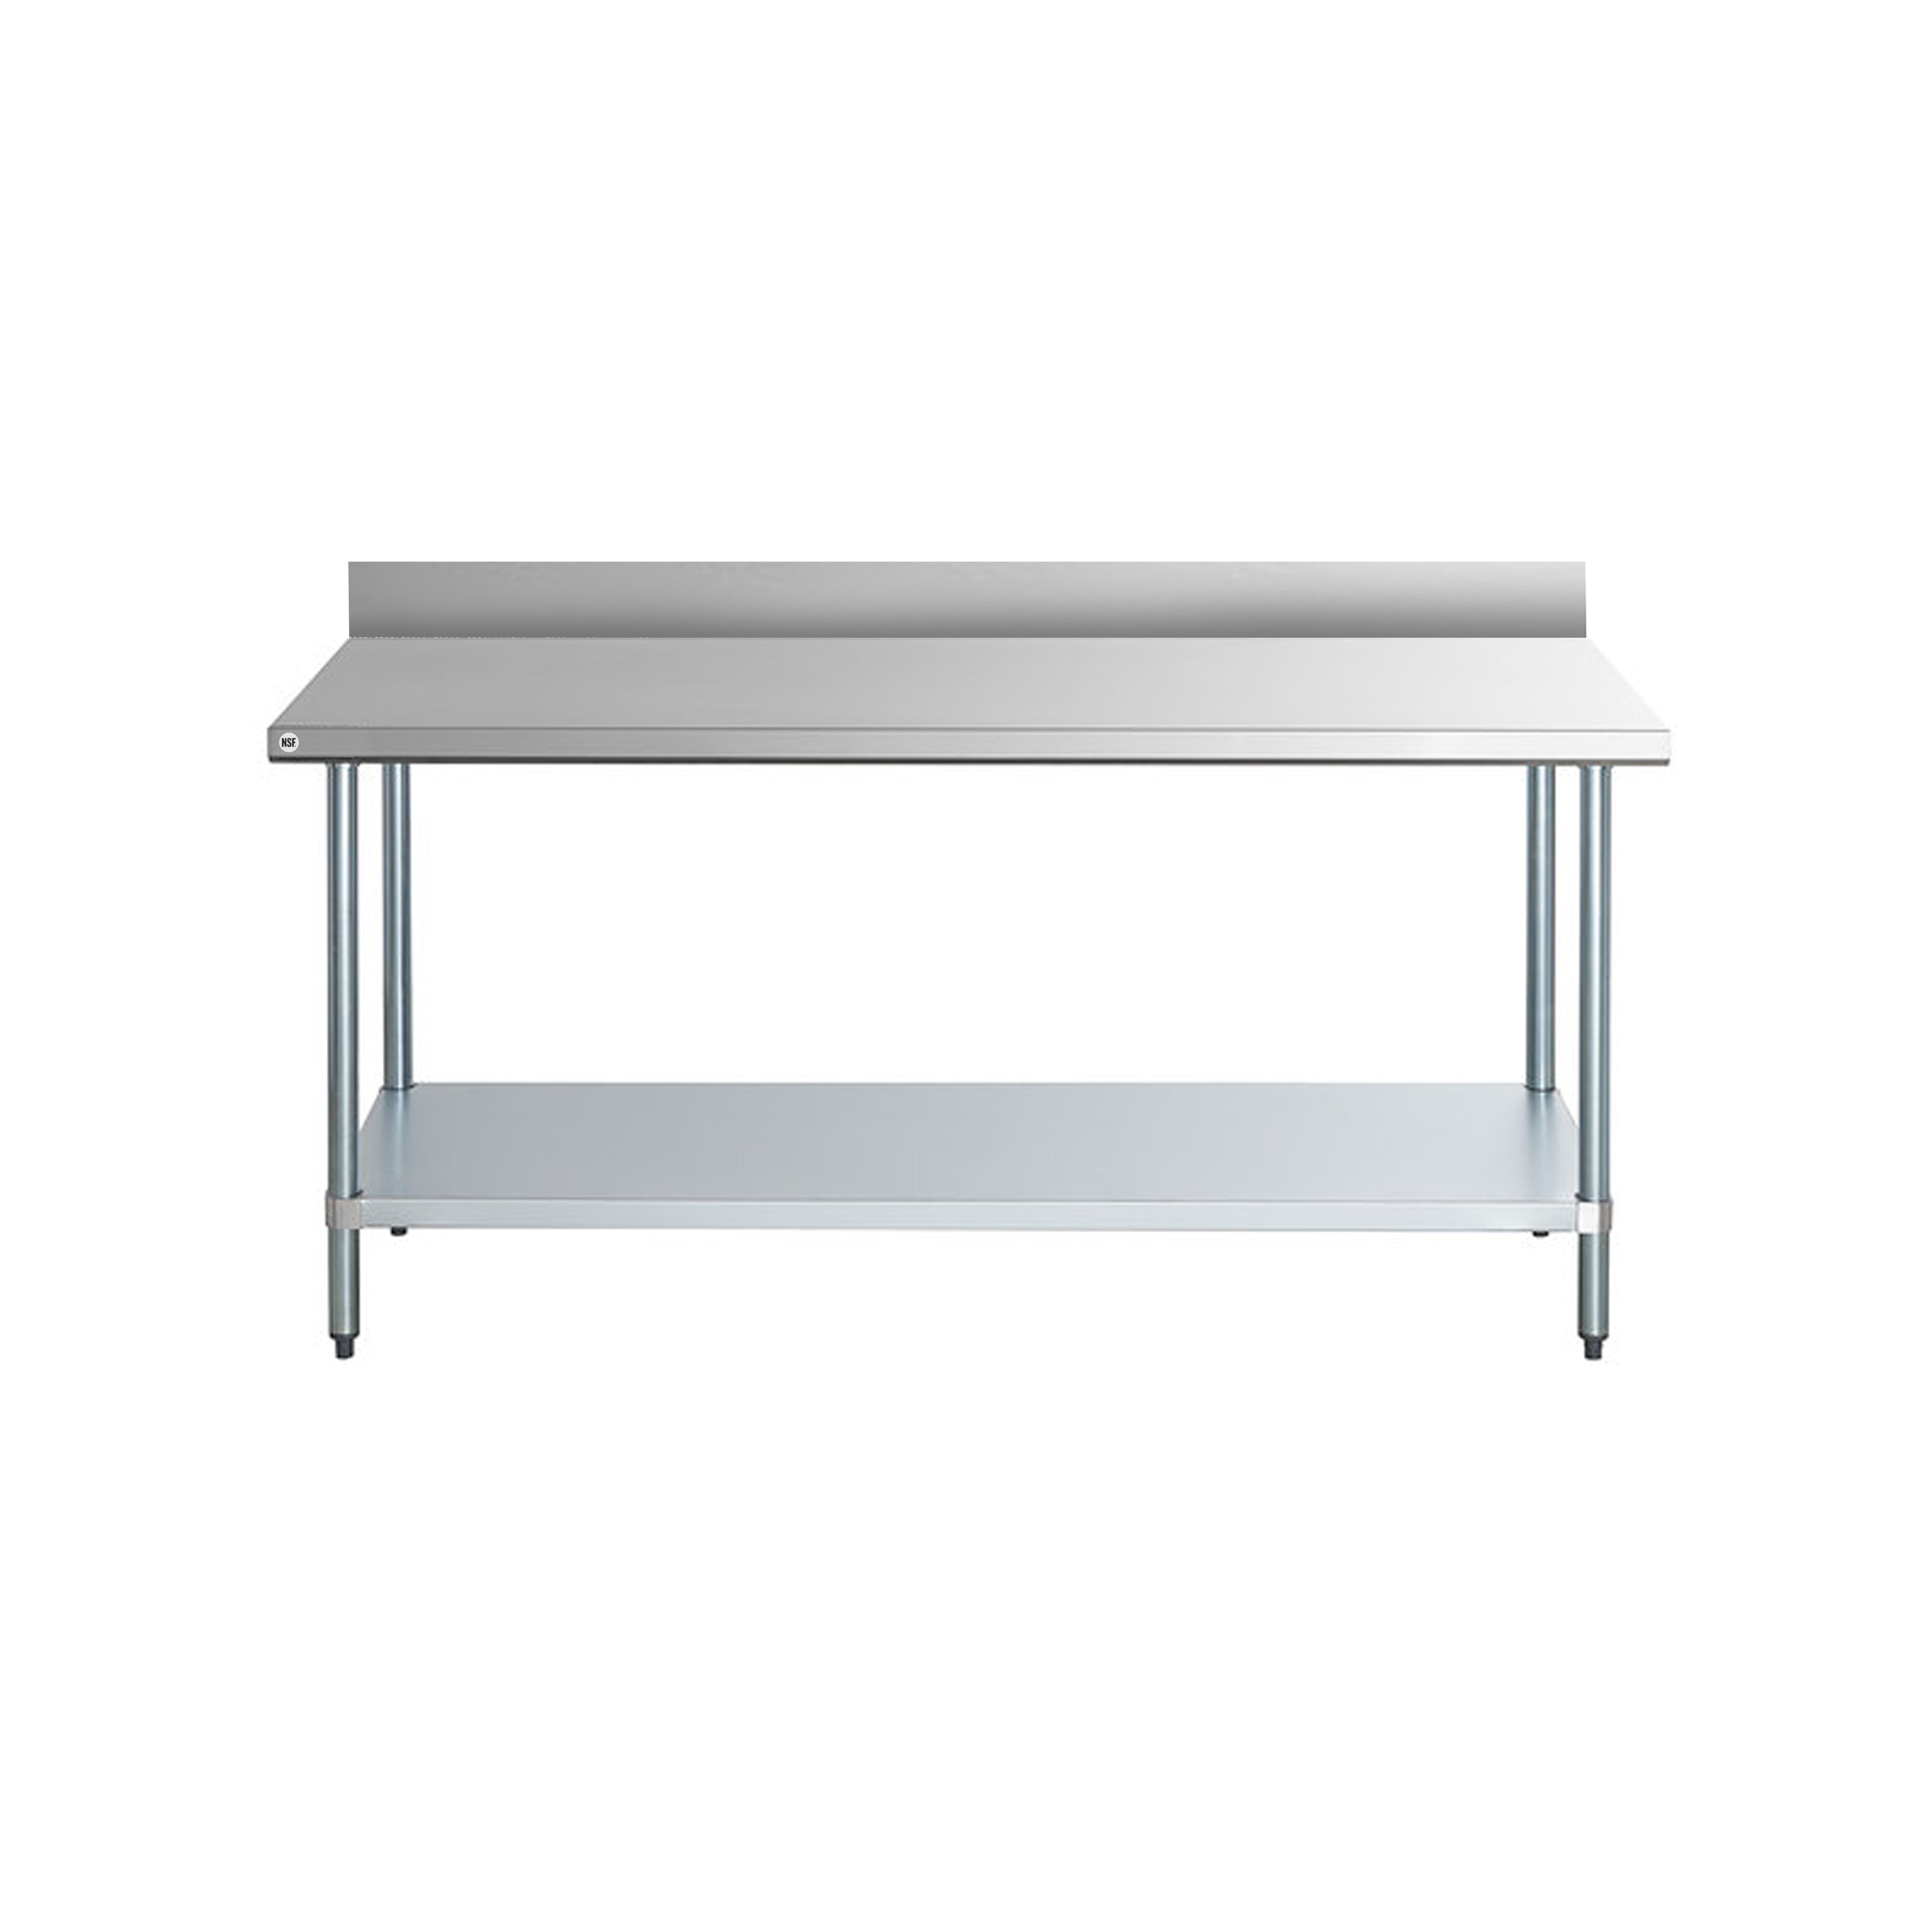 Omcan - 23796, Commercial 48" x 24" Stainless Steel Kitchen Work Table with 4" Back Splash 1000lbs Medium Duty